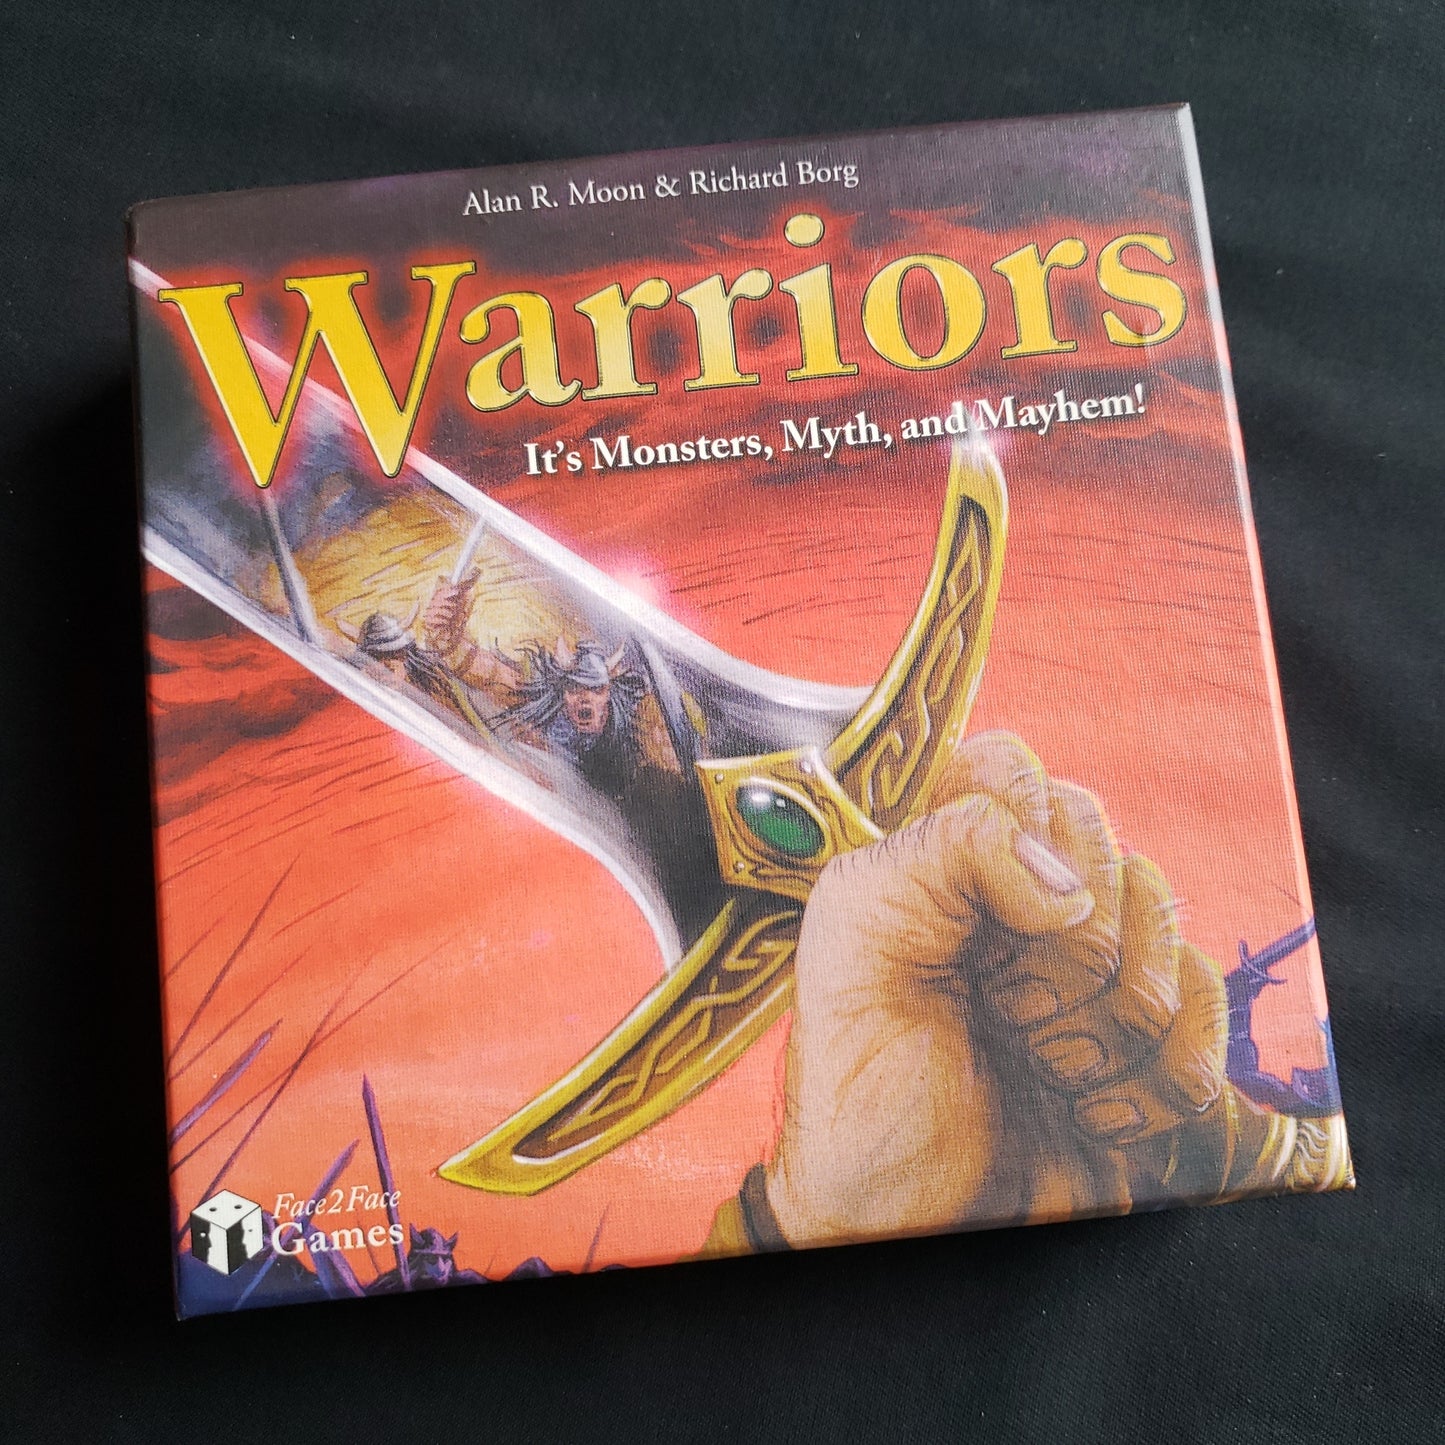 Image shows the front cover of the box of the Warriors card game